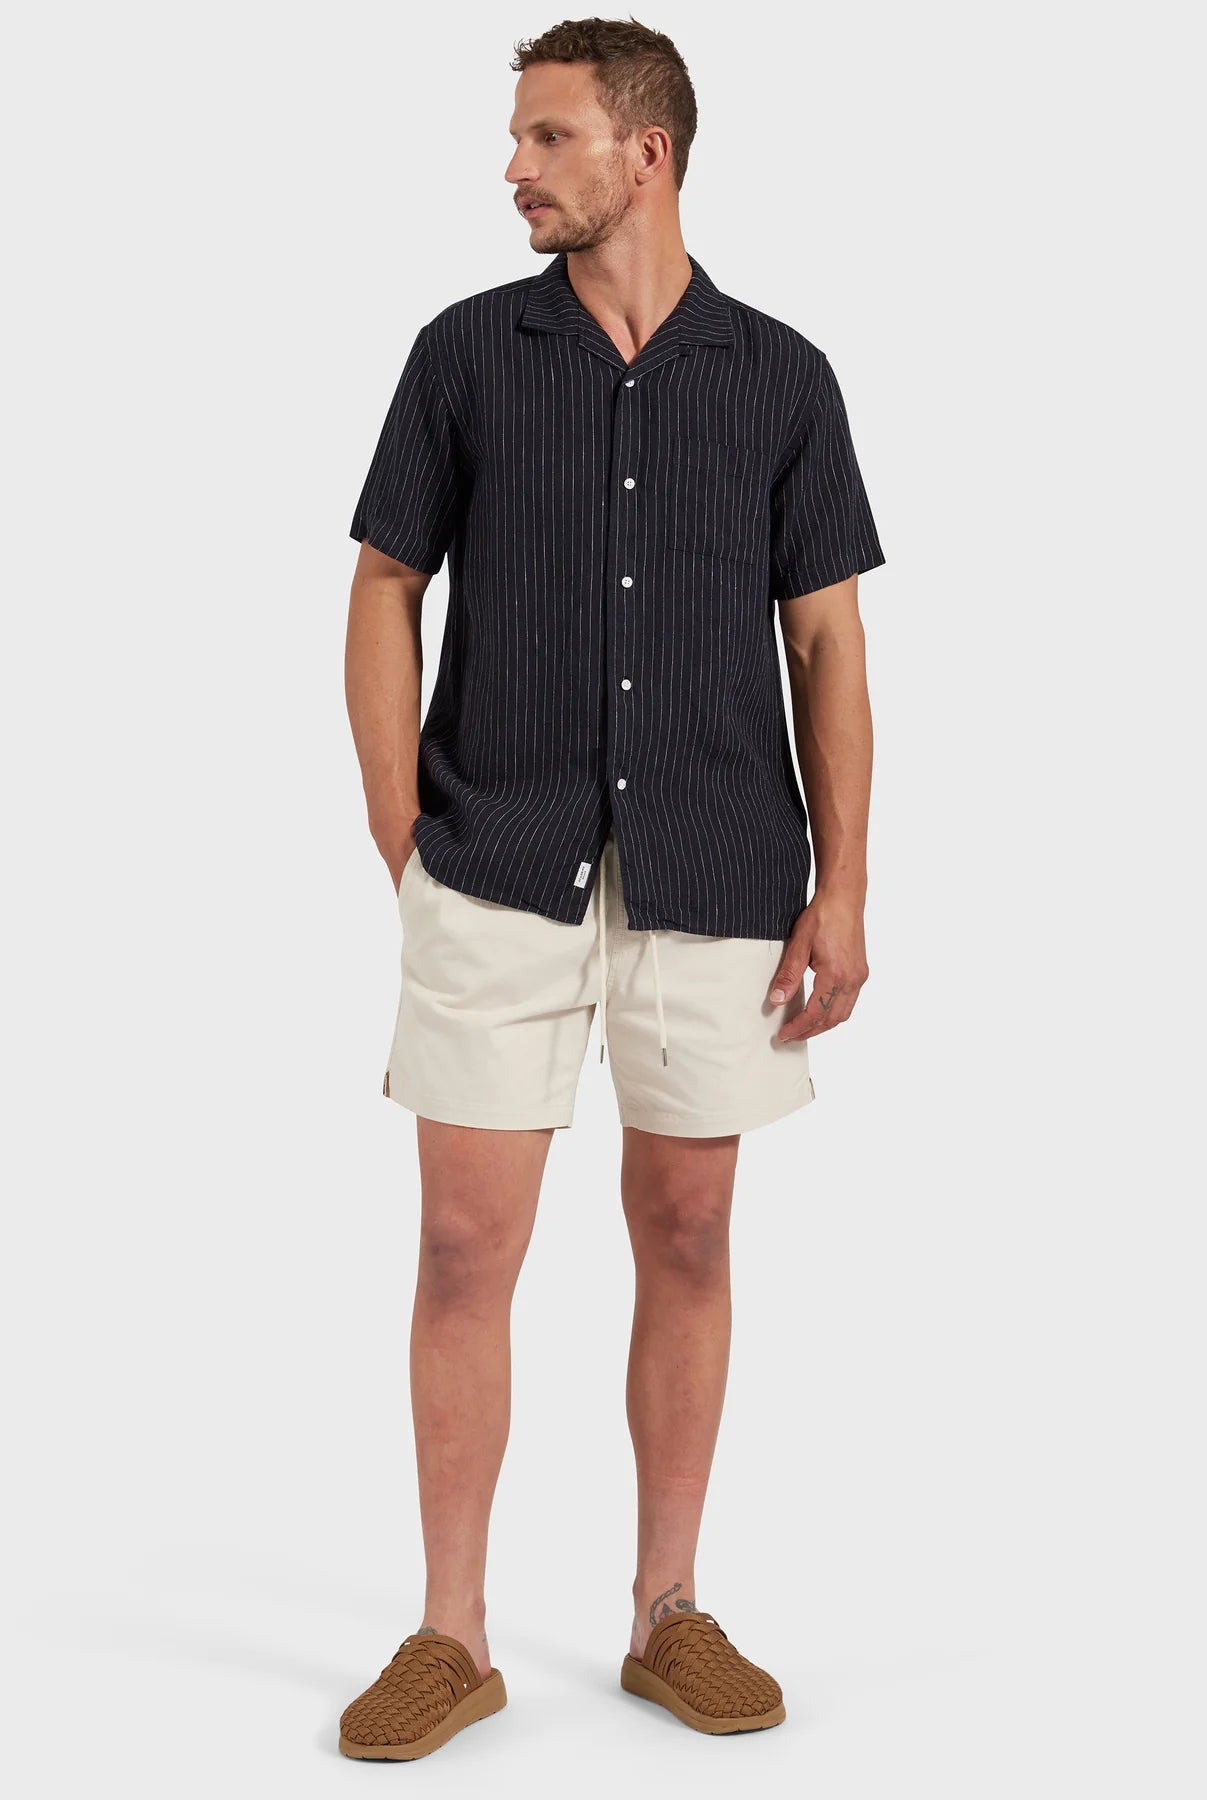 Cannon Short Sleeve Shirt in Navy